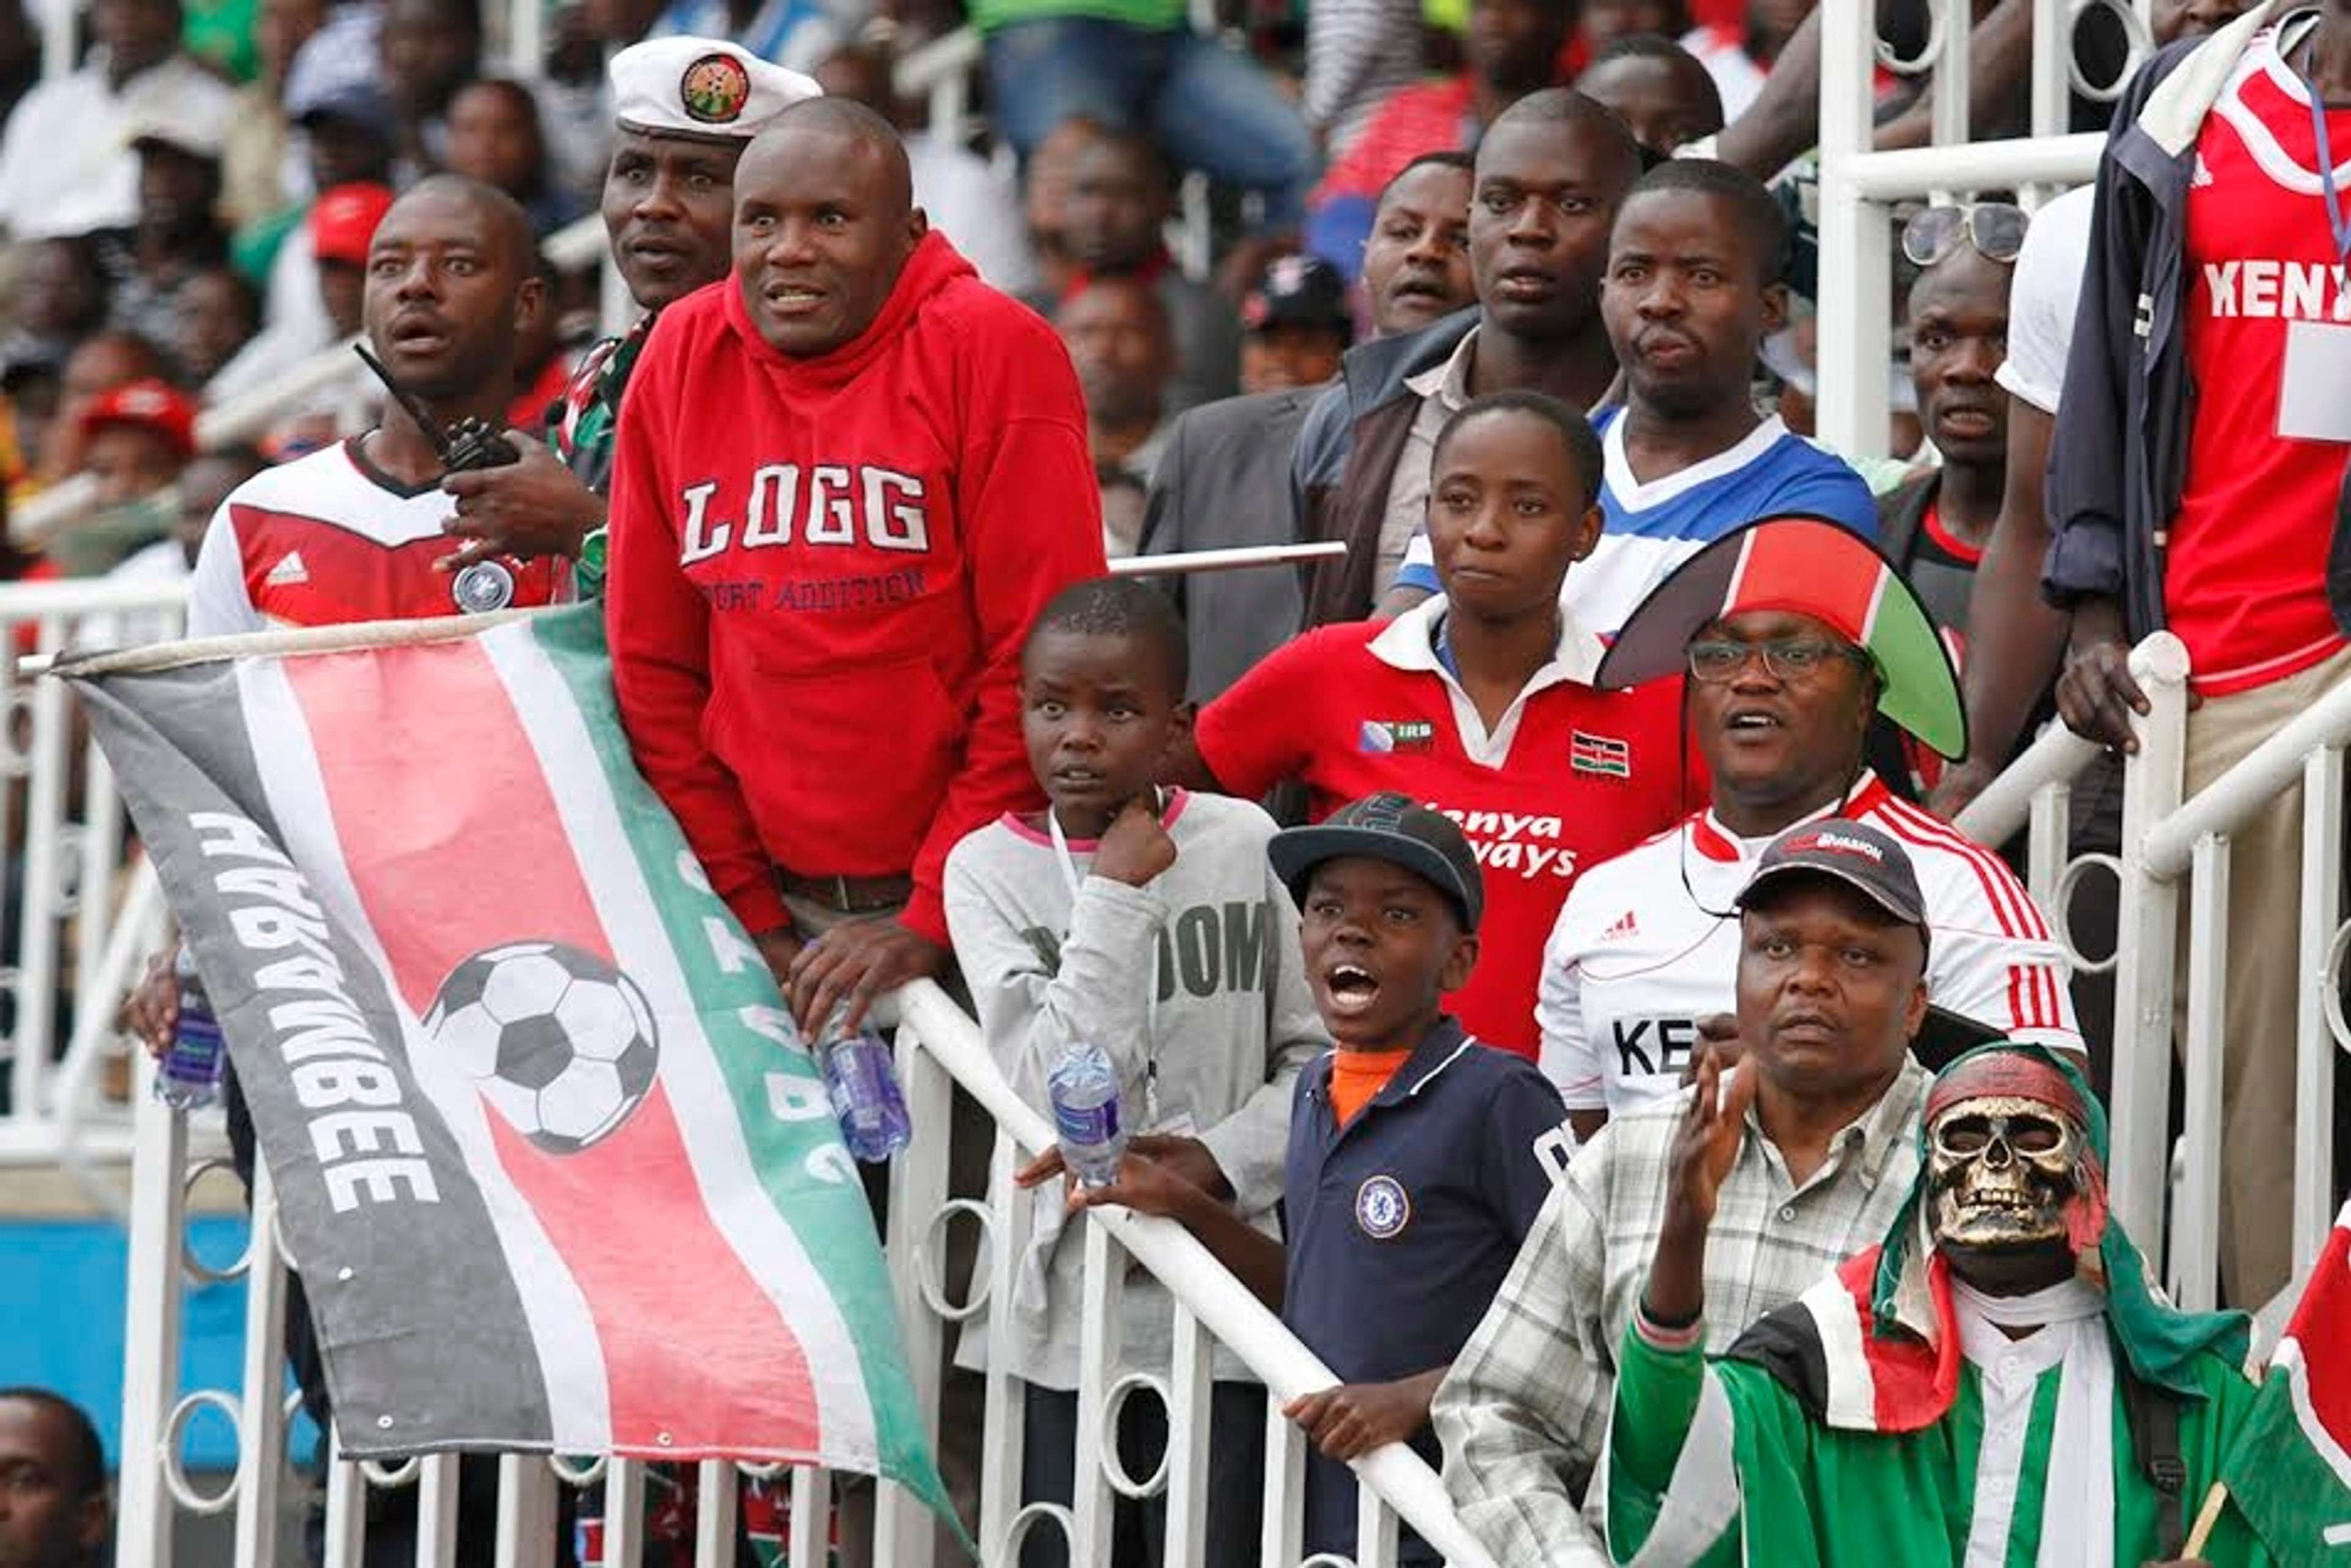 Harambee Stars fans have different views on the team